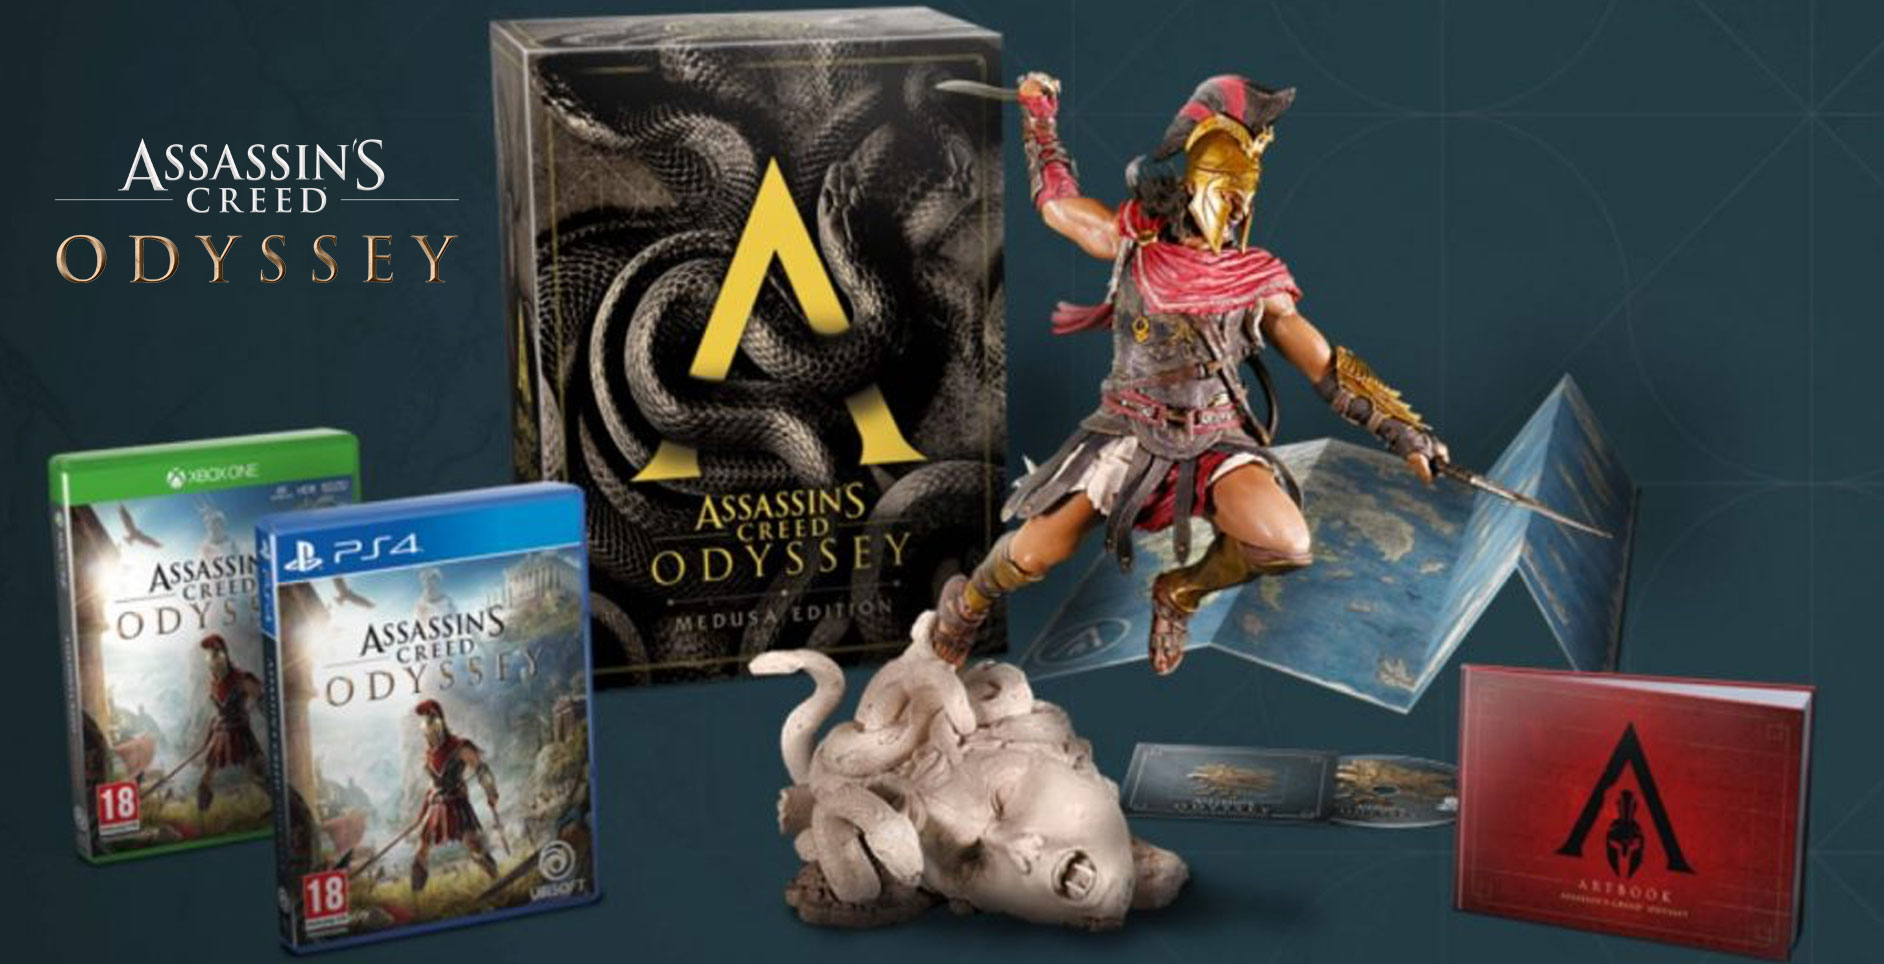 WINNERS REVEALED: Assassin's Creed Odyssey Medusa Editions On PS4/Xbox One